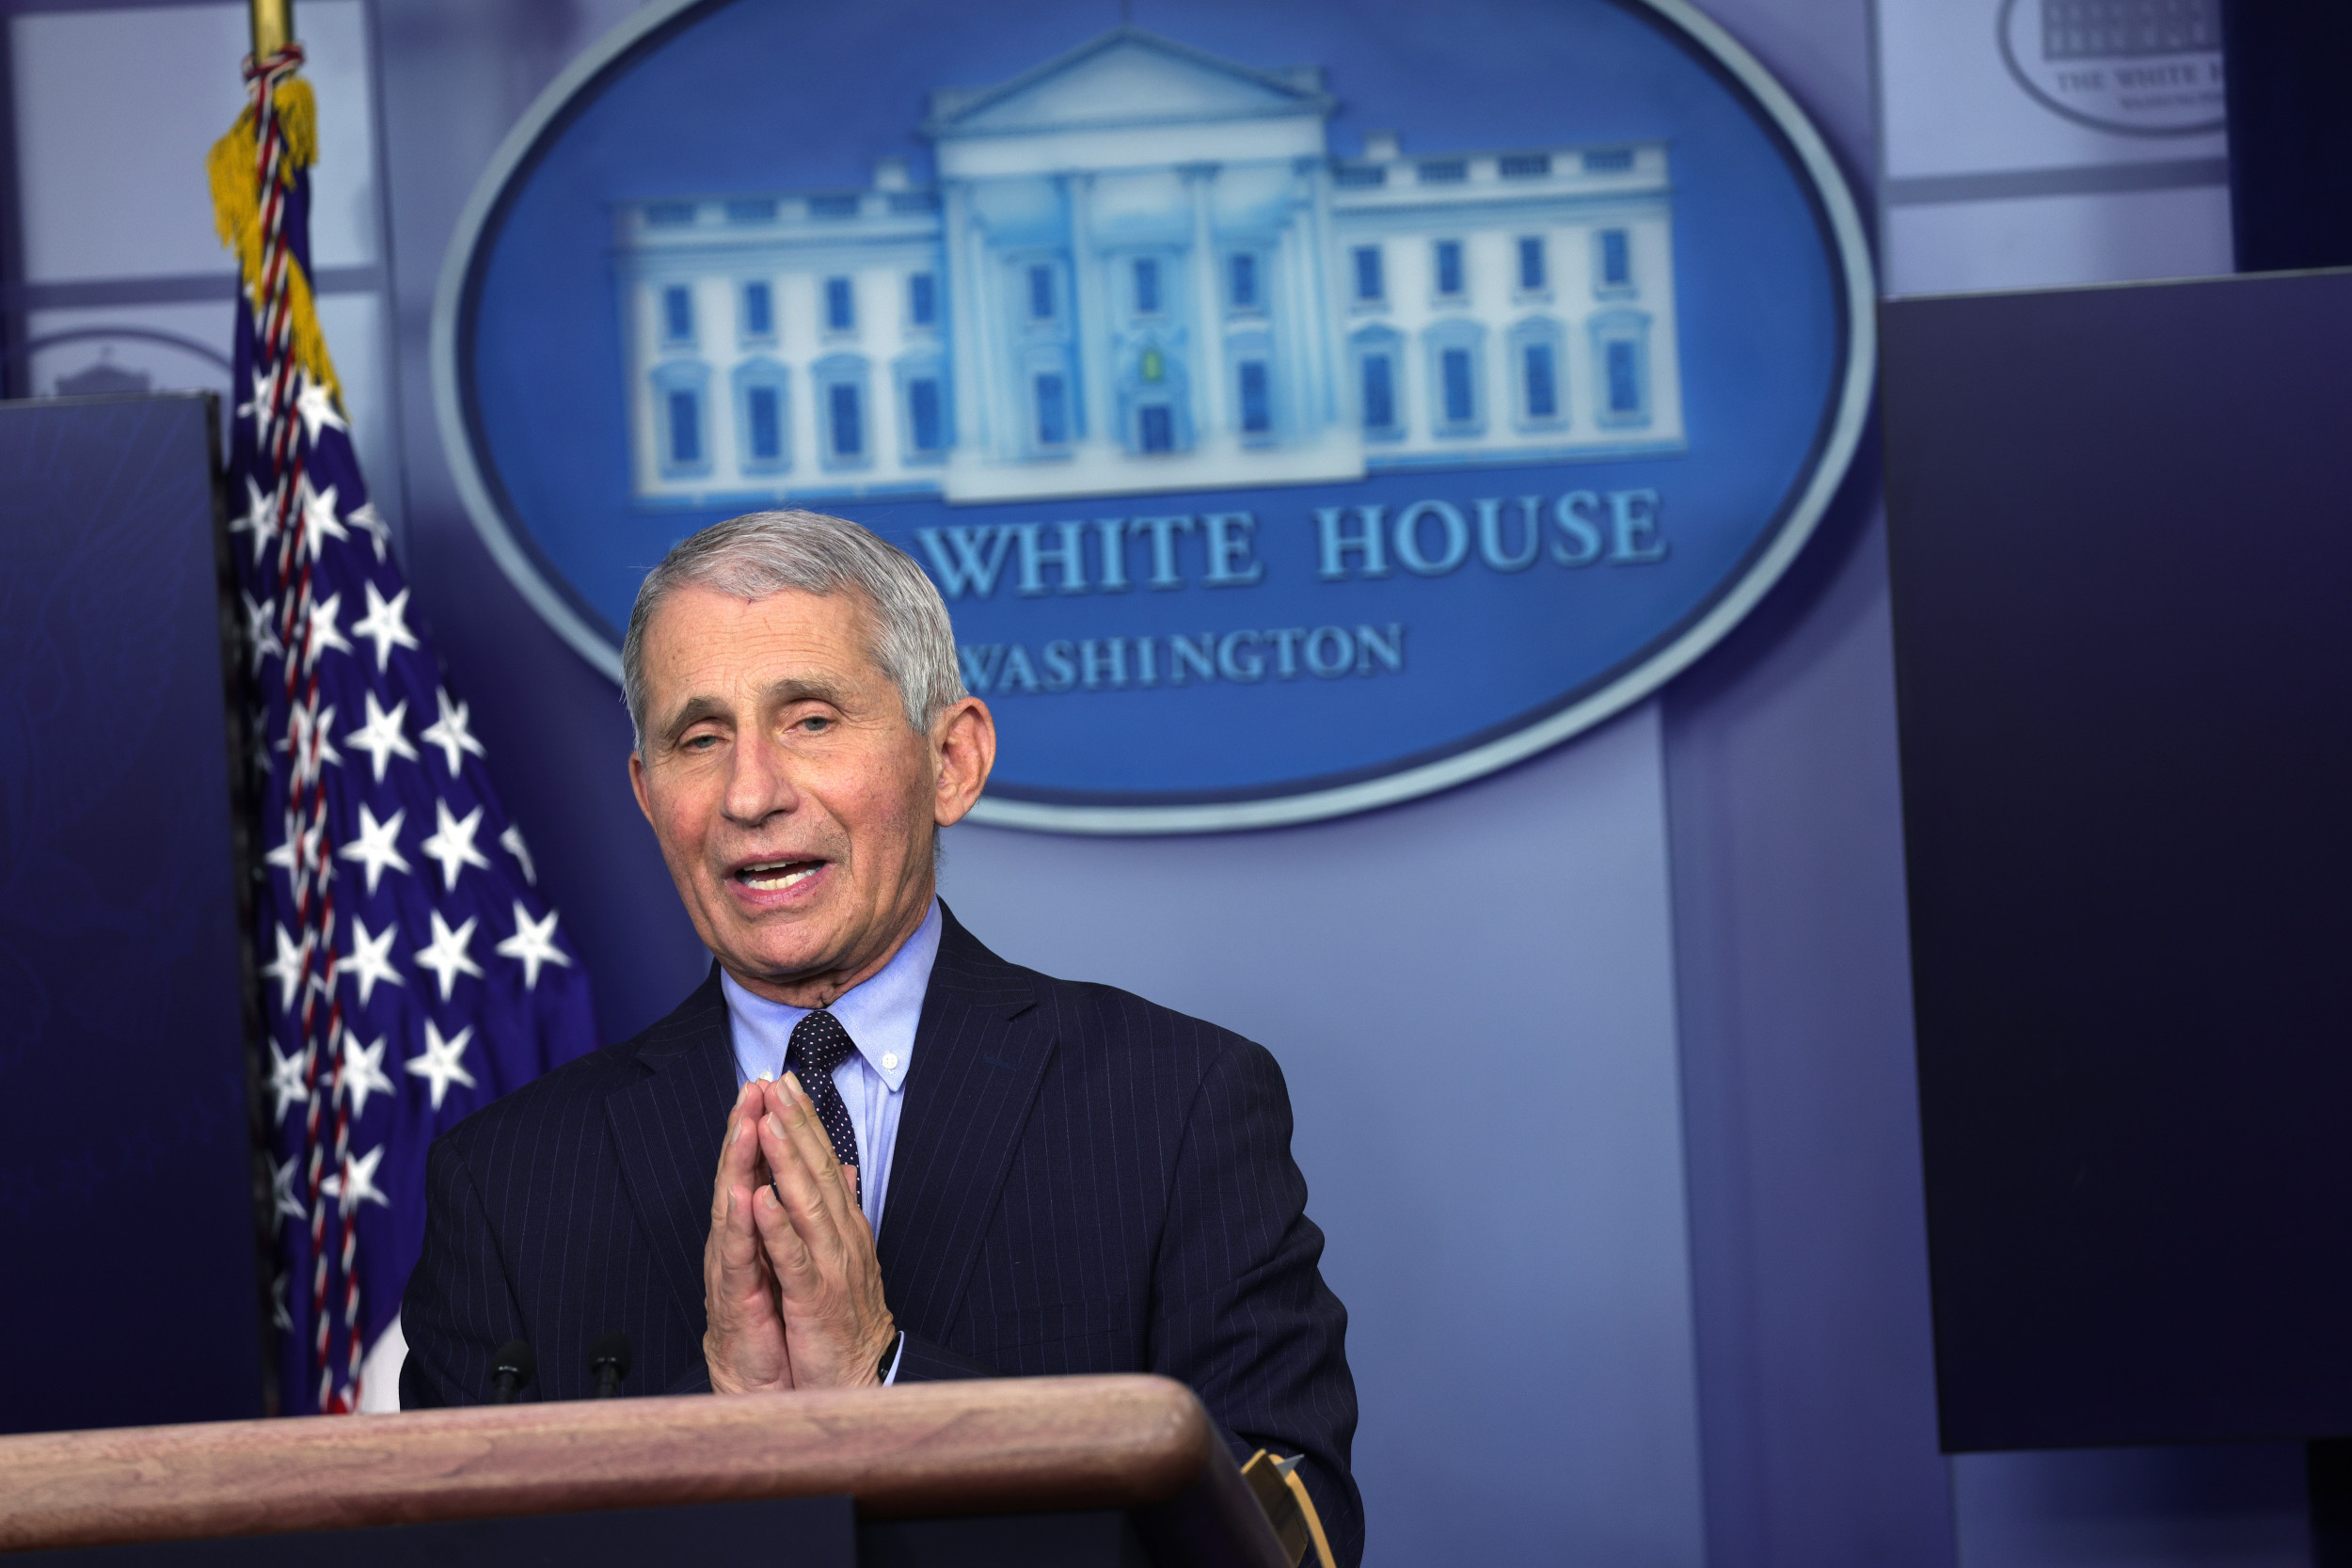 Anthony Fauci Says Trump Tried to Coax Him Into Minimizing COVID Pandemic: 'Be More Positive' - Newsweek